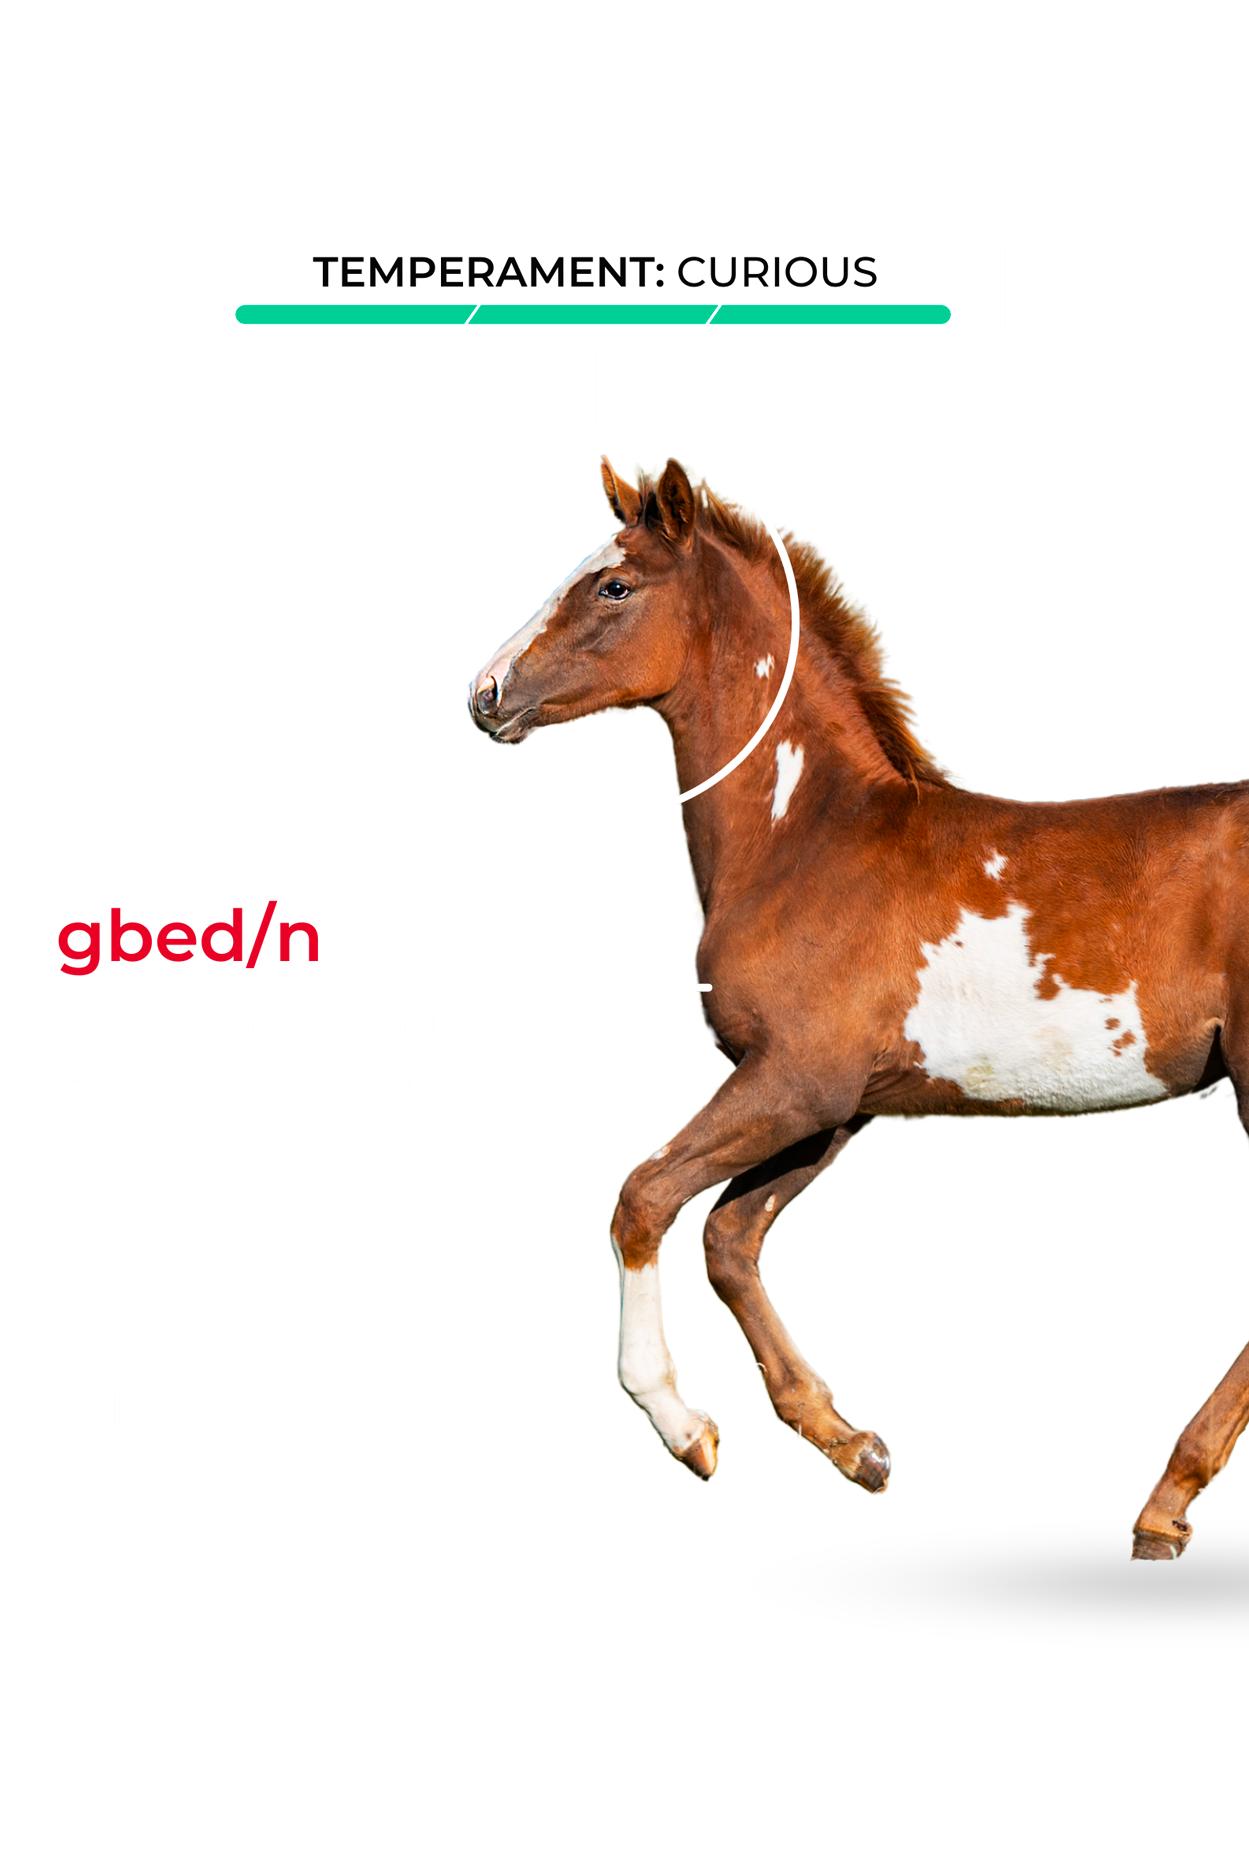 Horse with trait markers overlaid